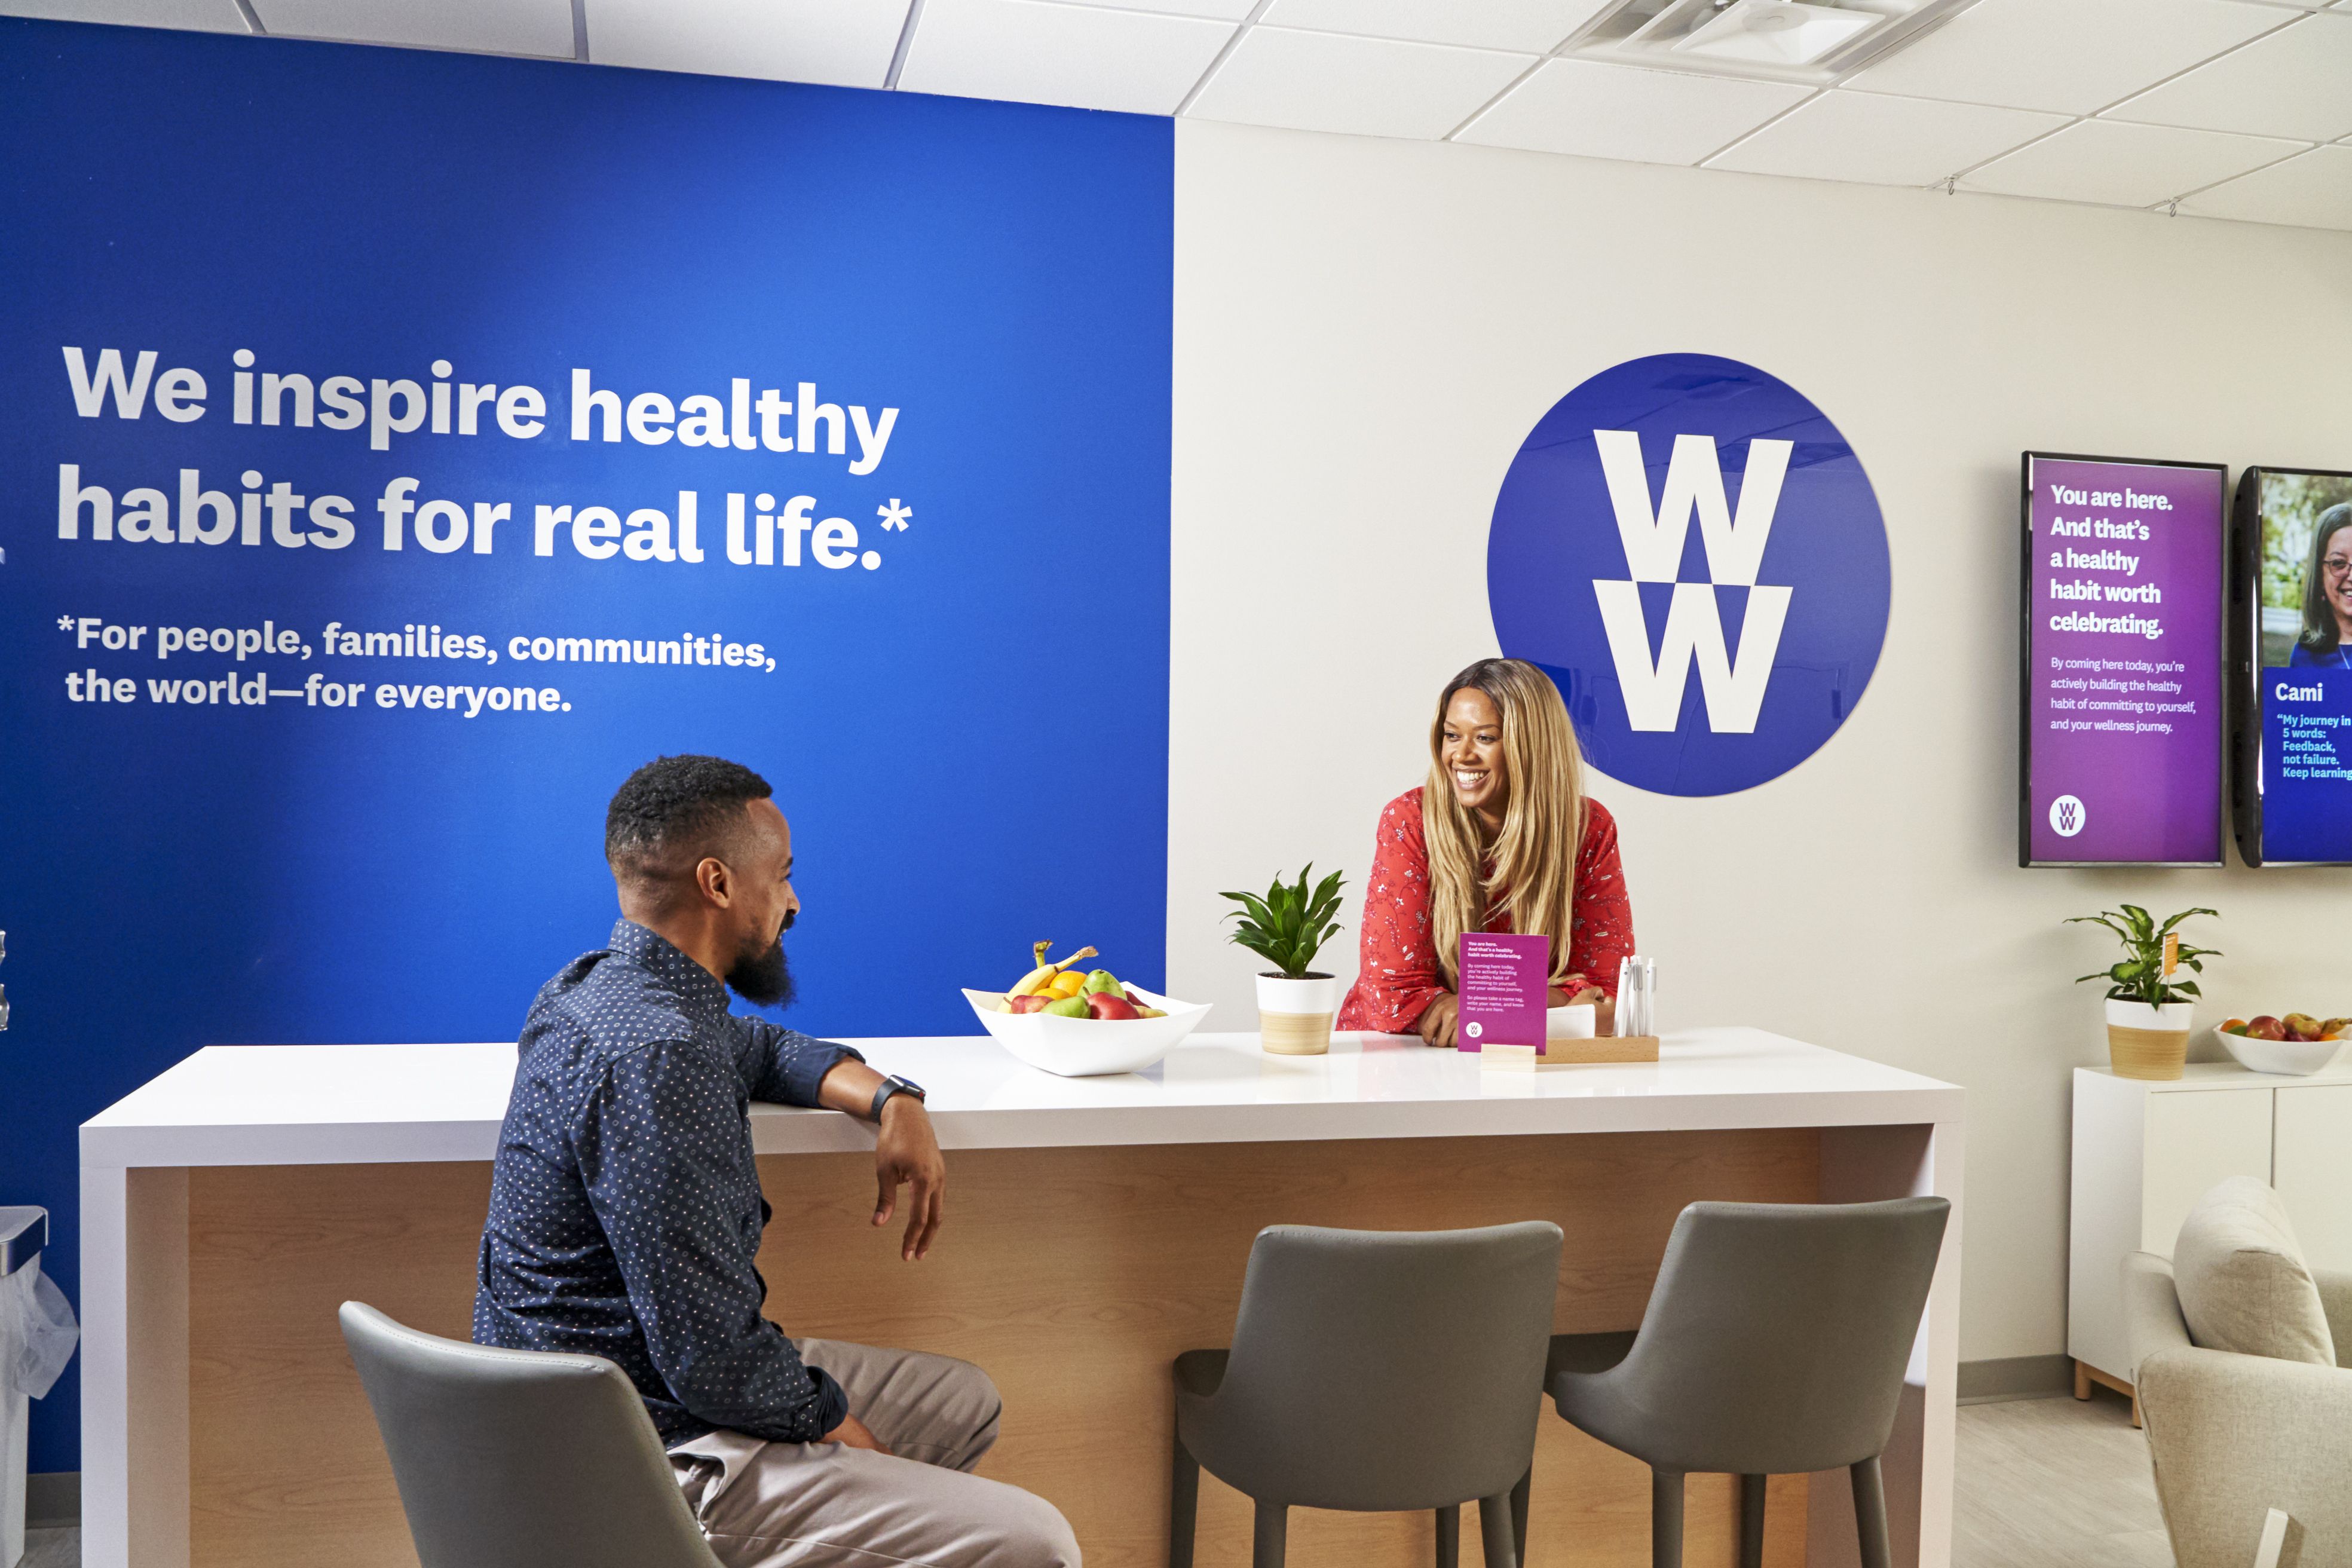 Weight Watchers stock surges on earnings beat